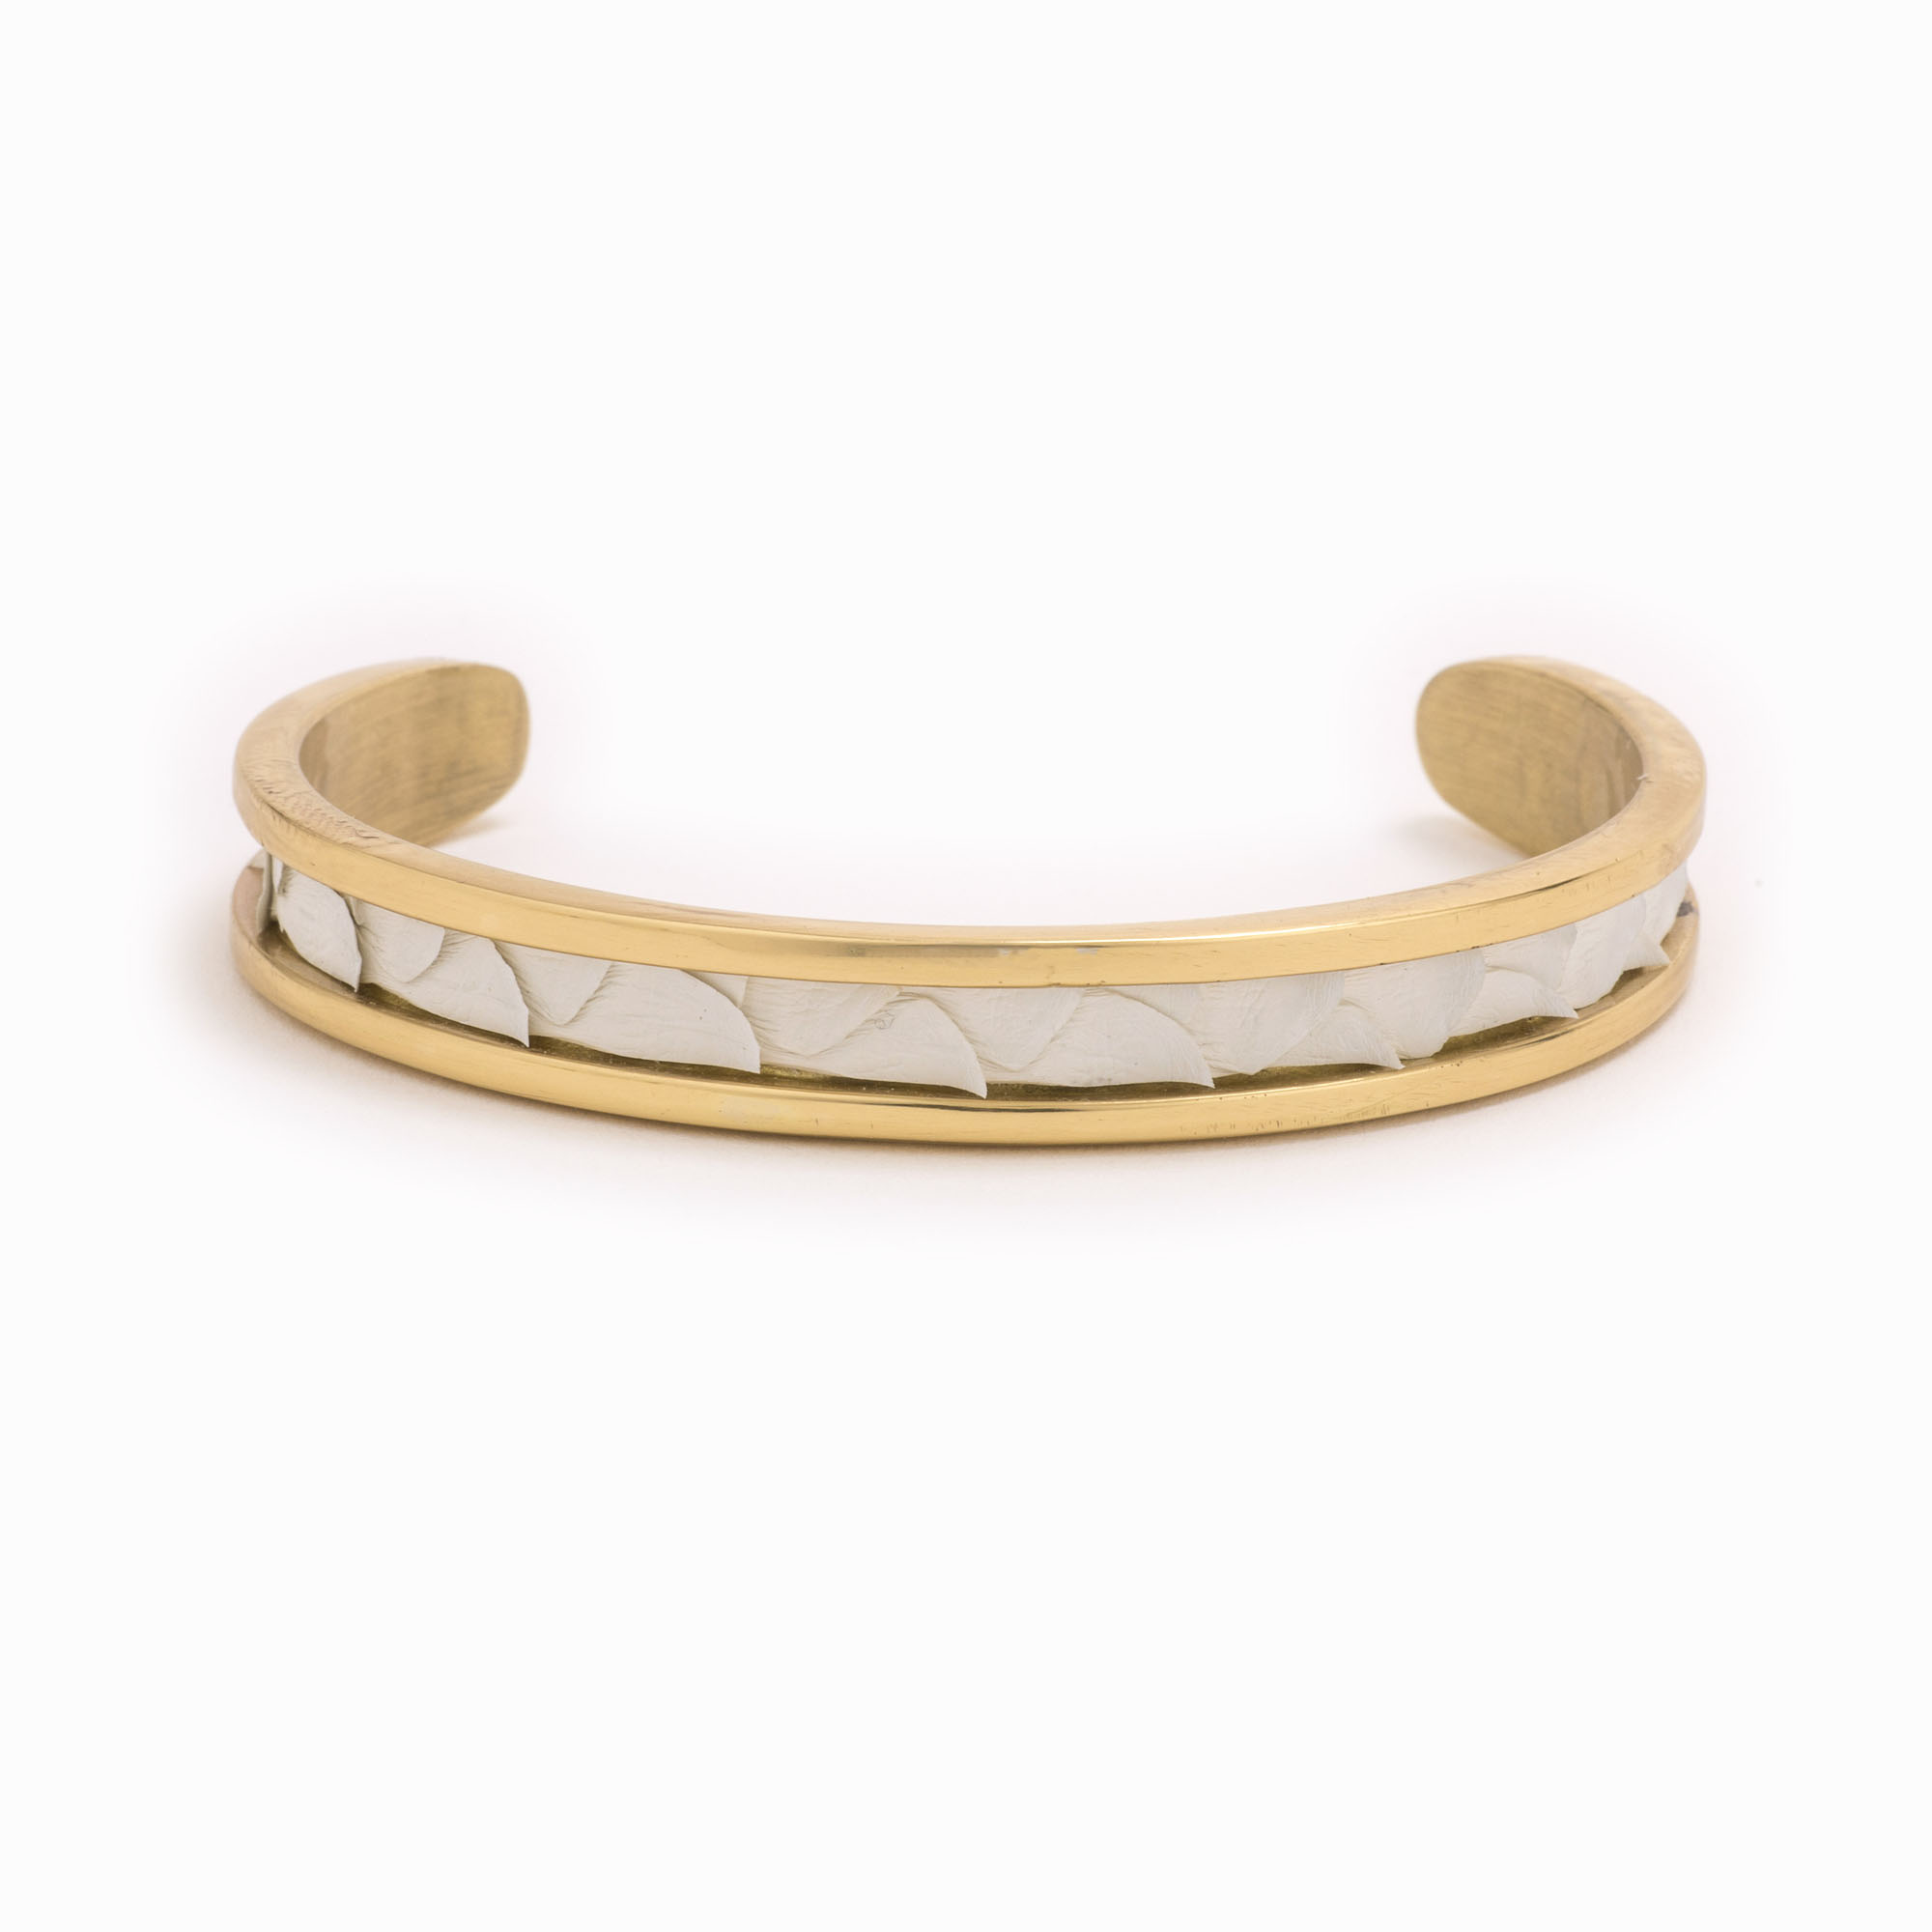 A small gold cuff with white colored snakeskin pattern inlaid.